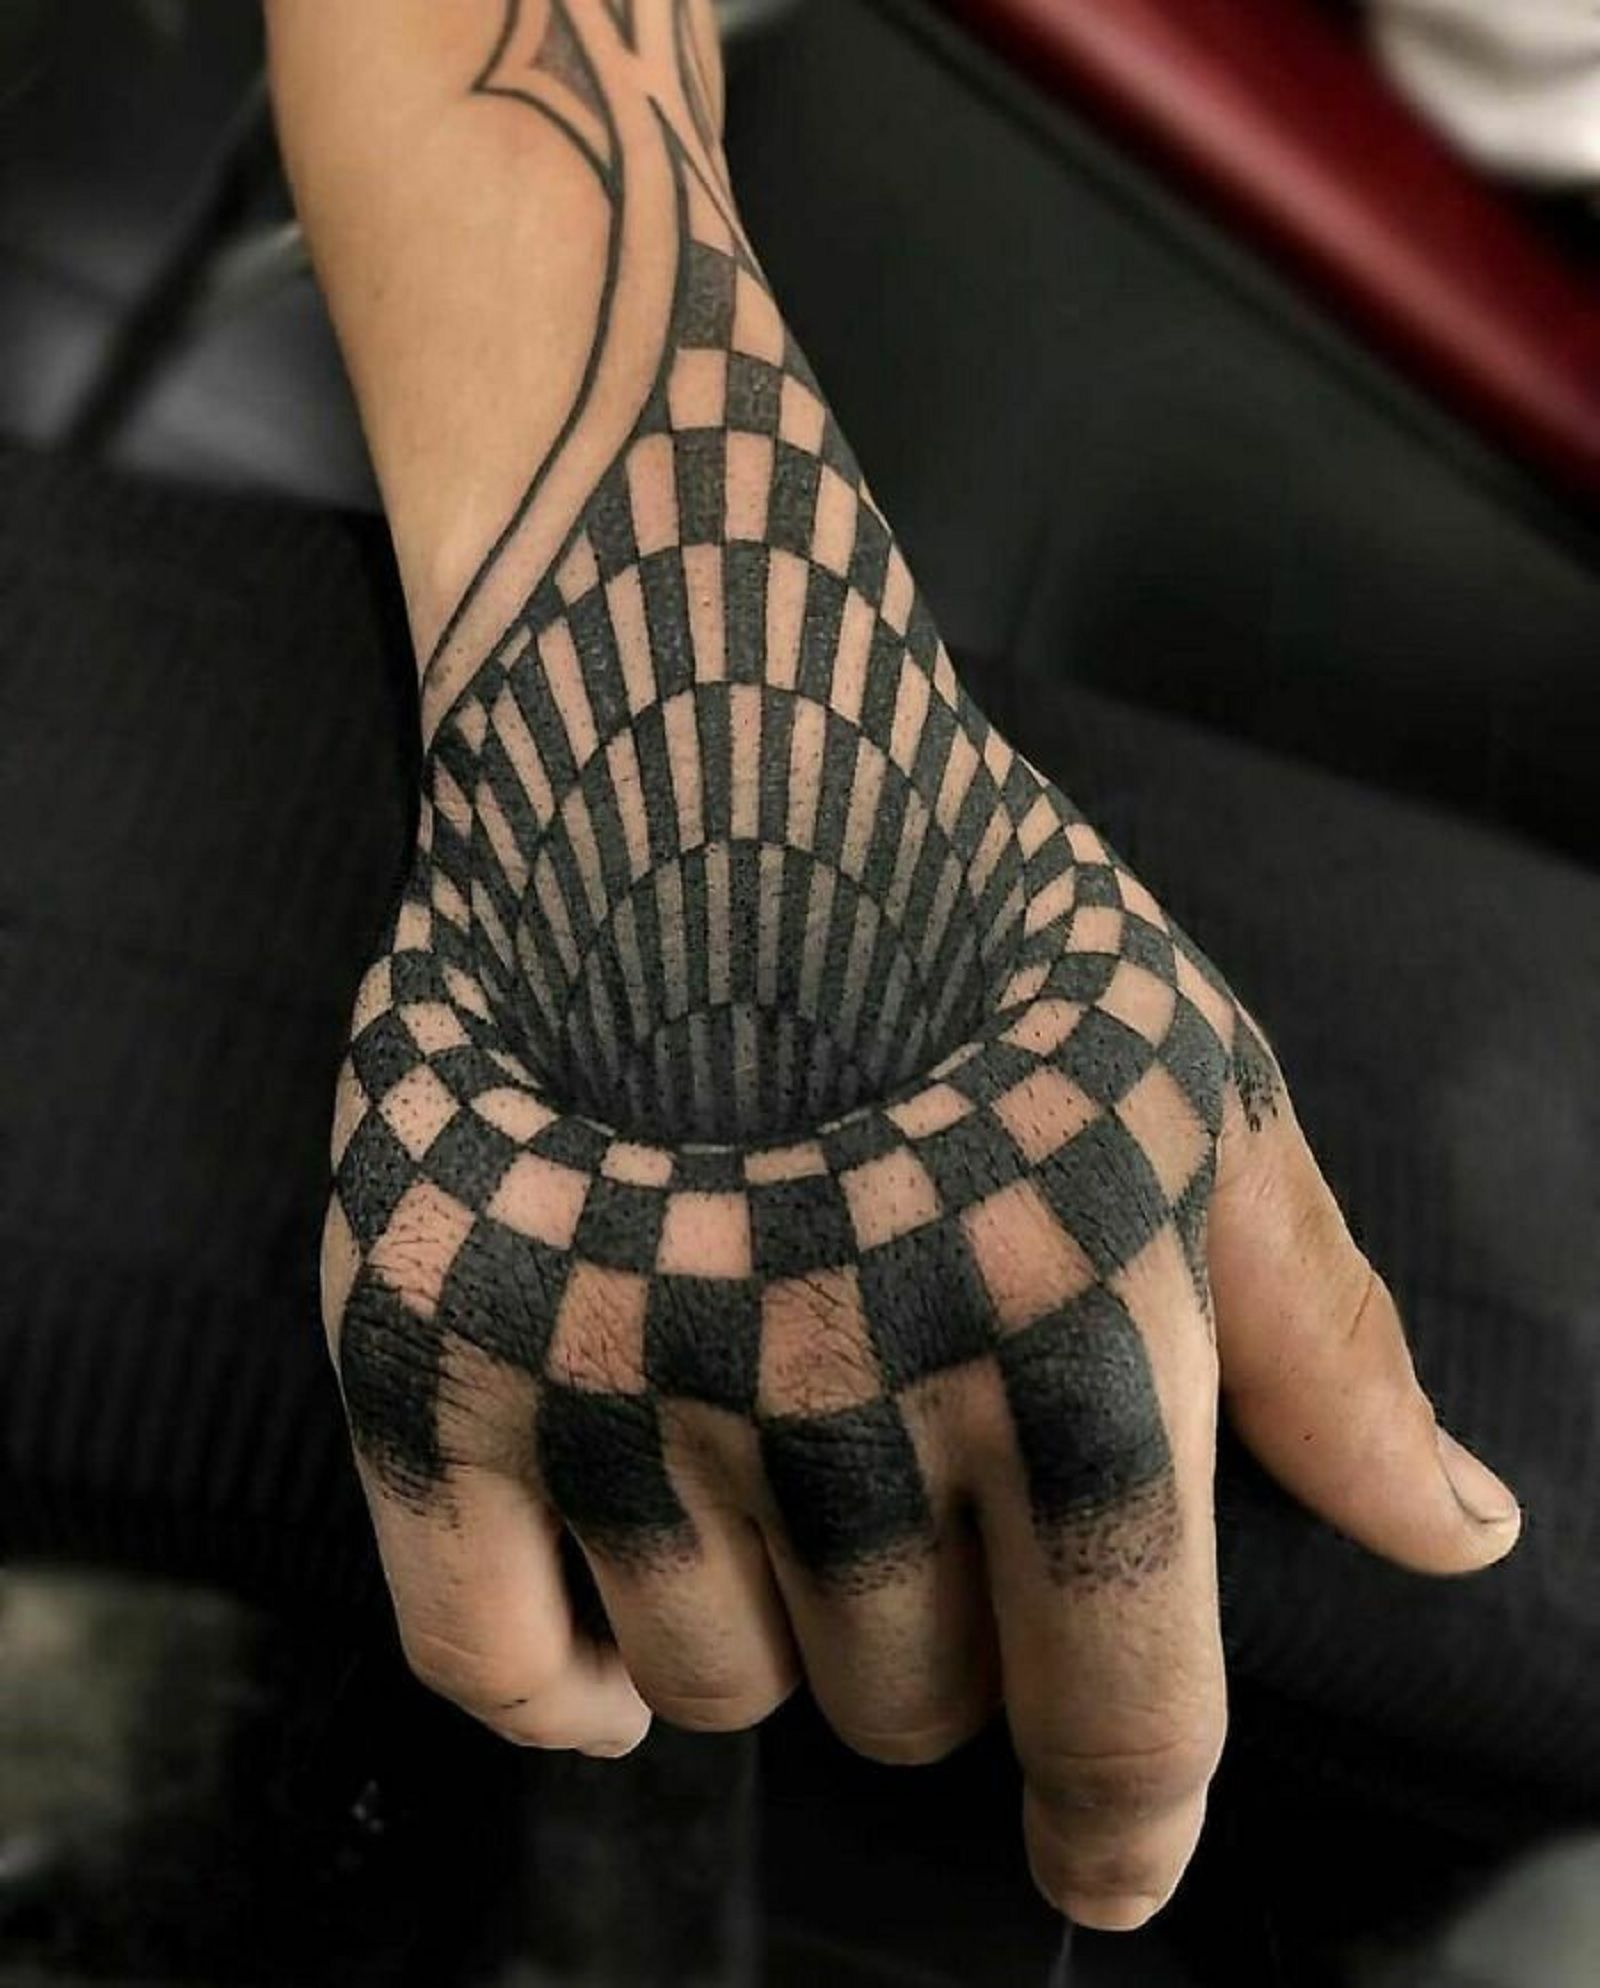 33 awesome 3D tattoos that will make you question reality - Legit.ng